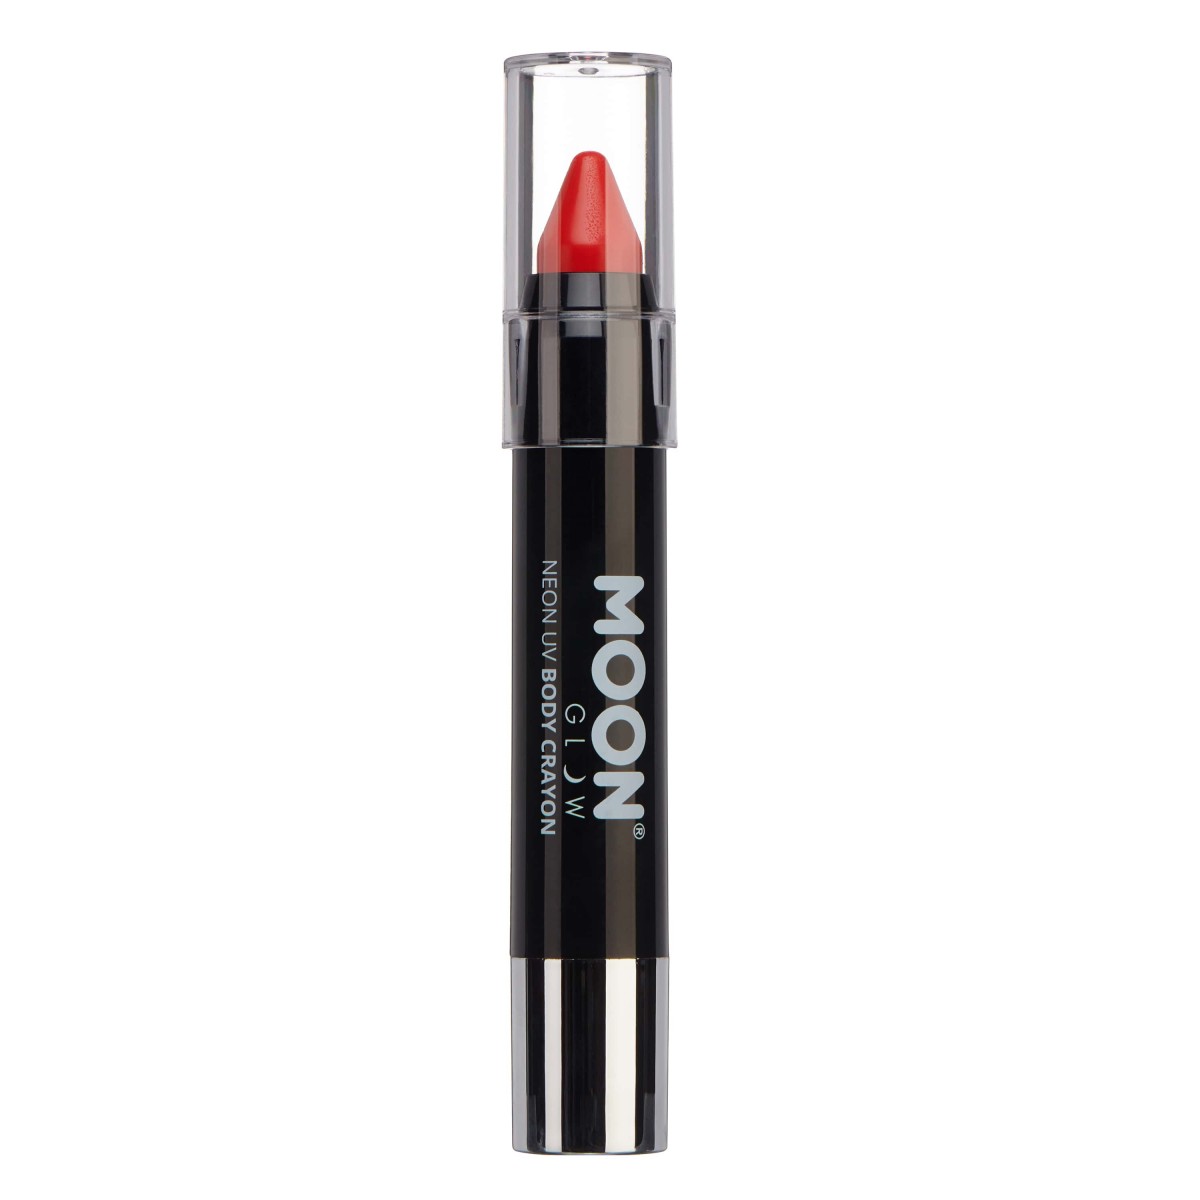 MOON CREATIONS M8 INTENSE NEON UV FACE & BODY CRAYON RED 3.2g